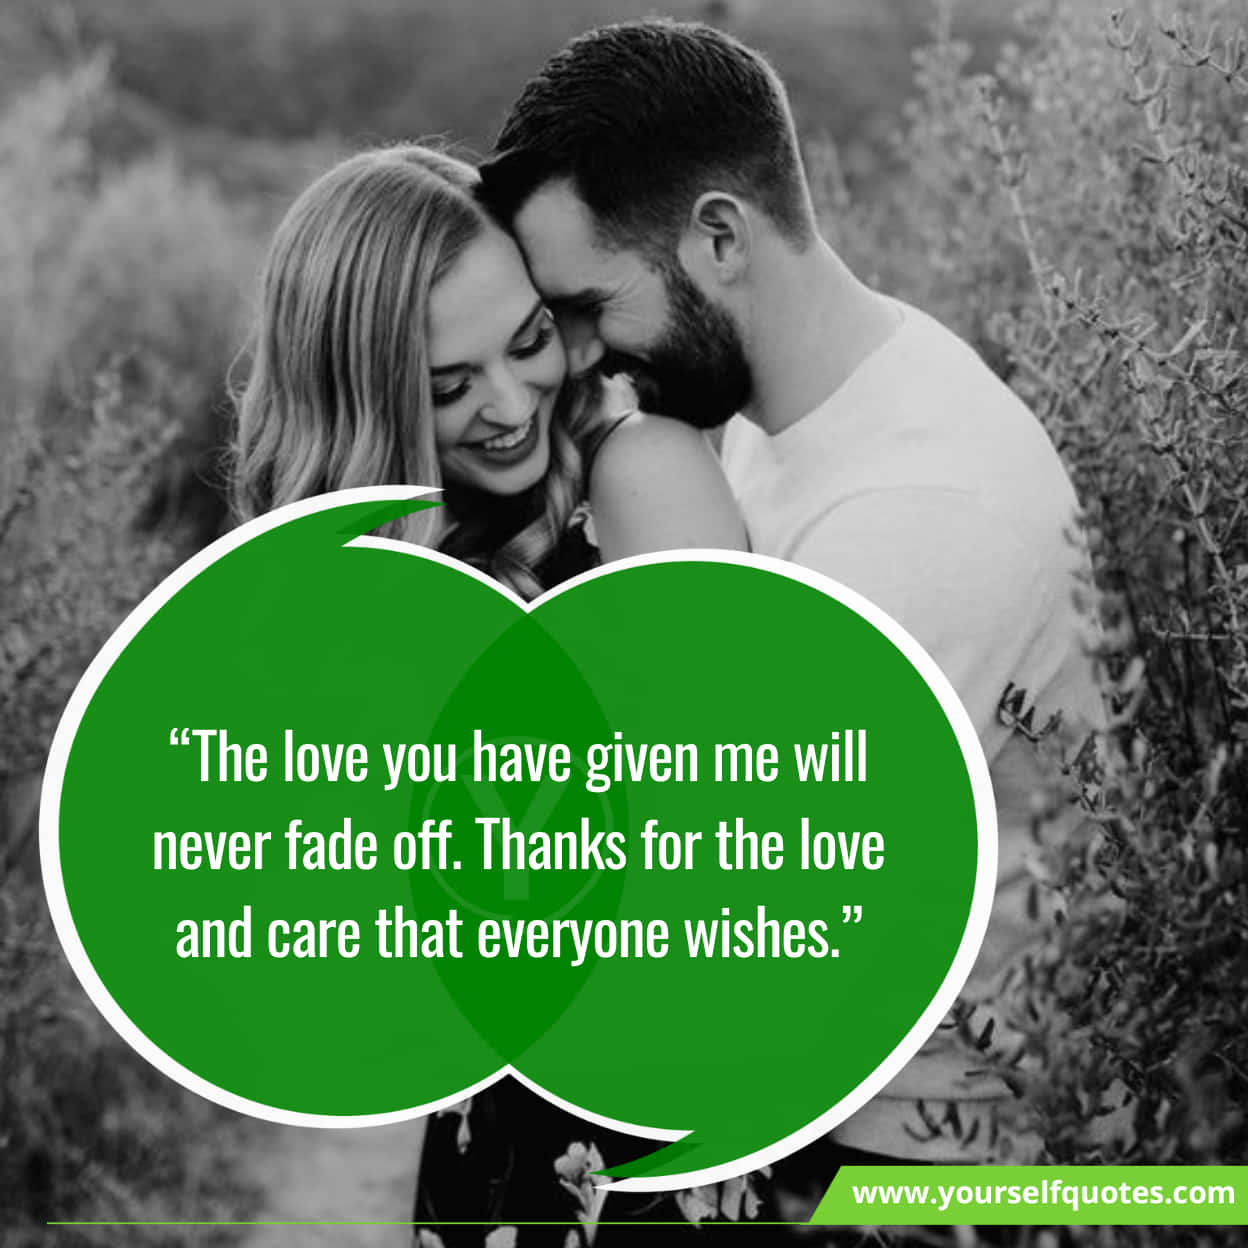 Charming Love Messages For Boyfriend